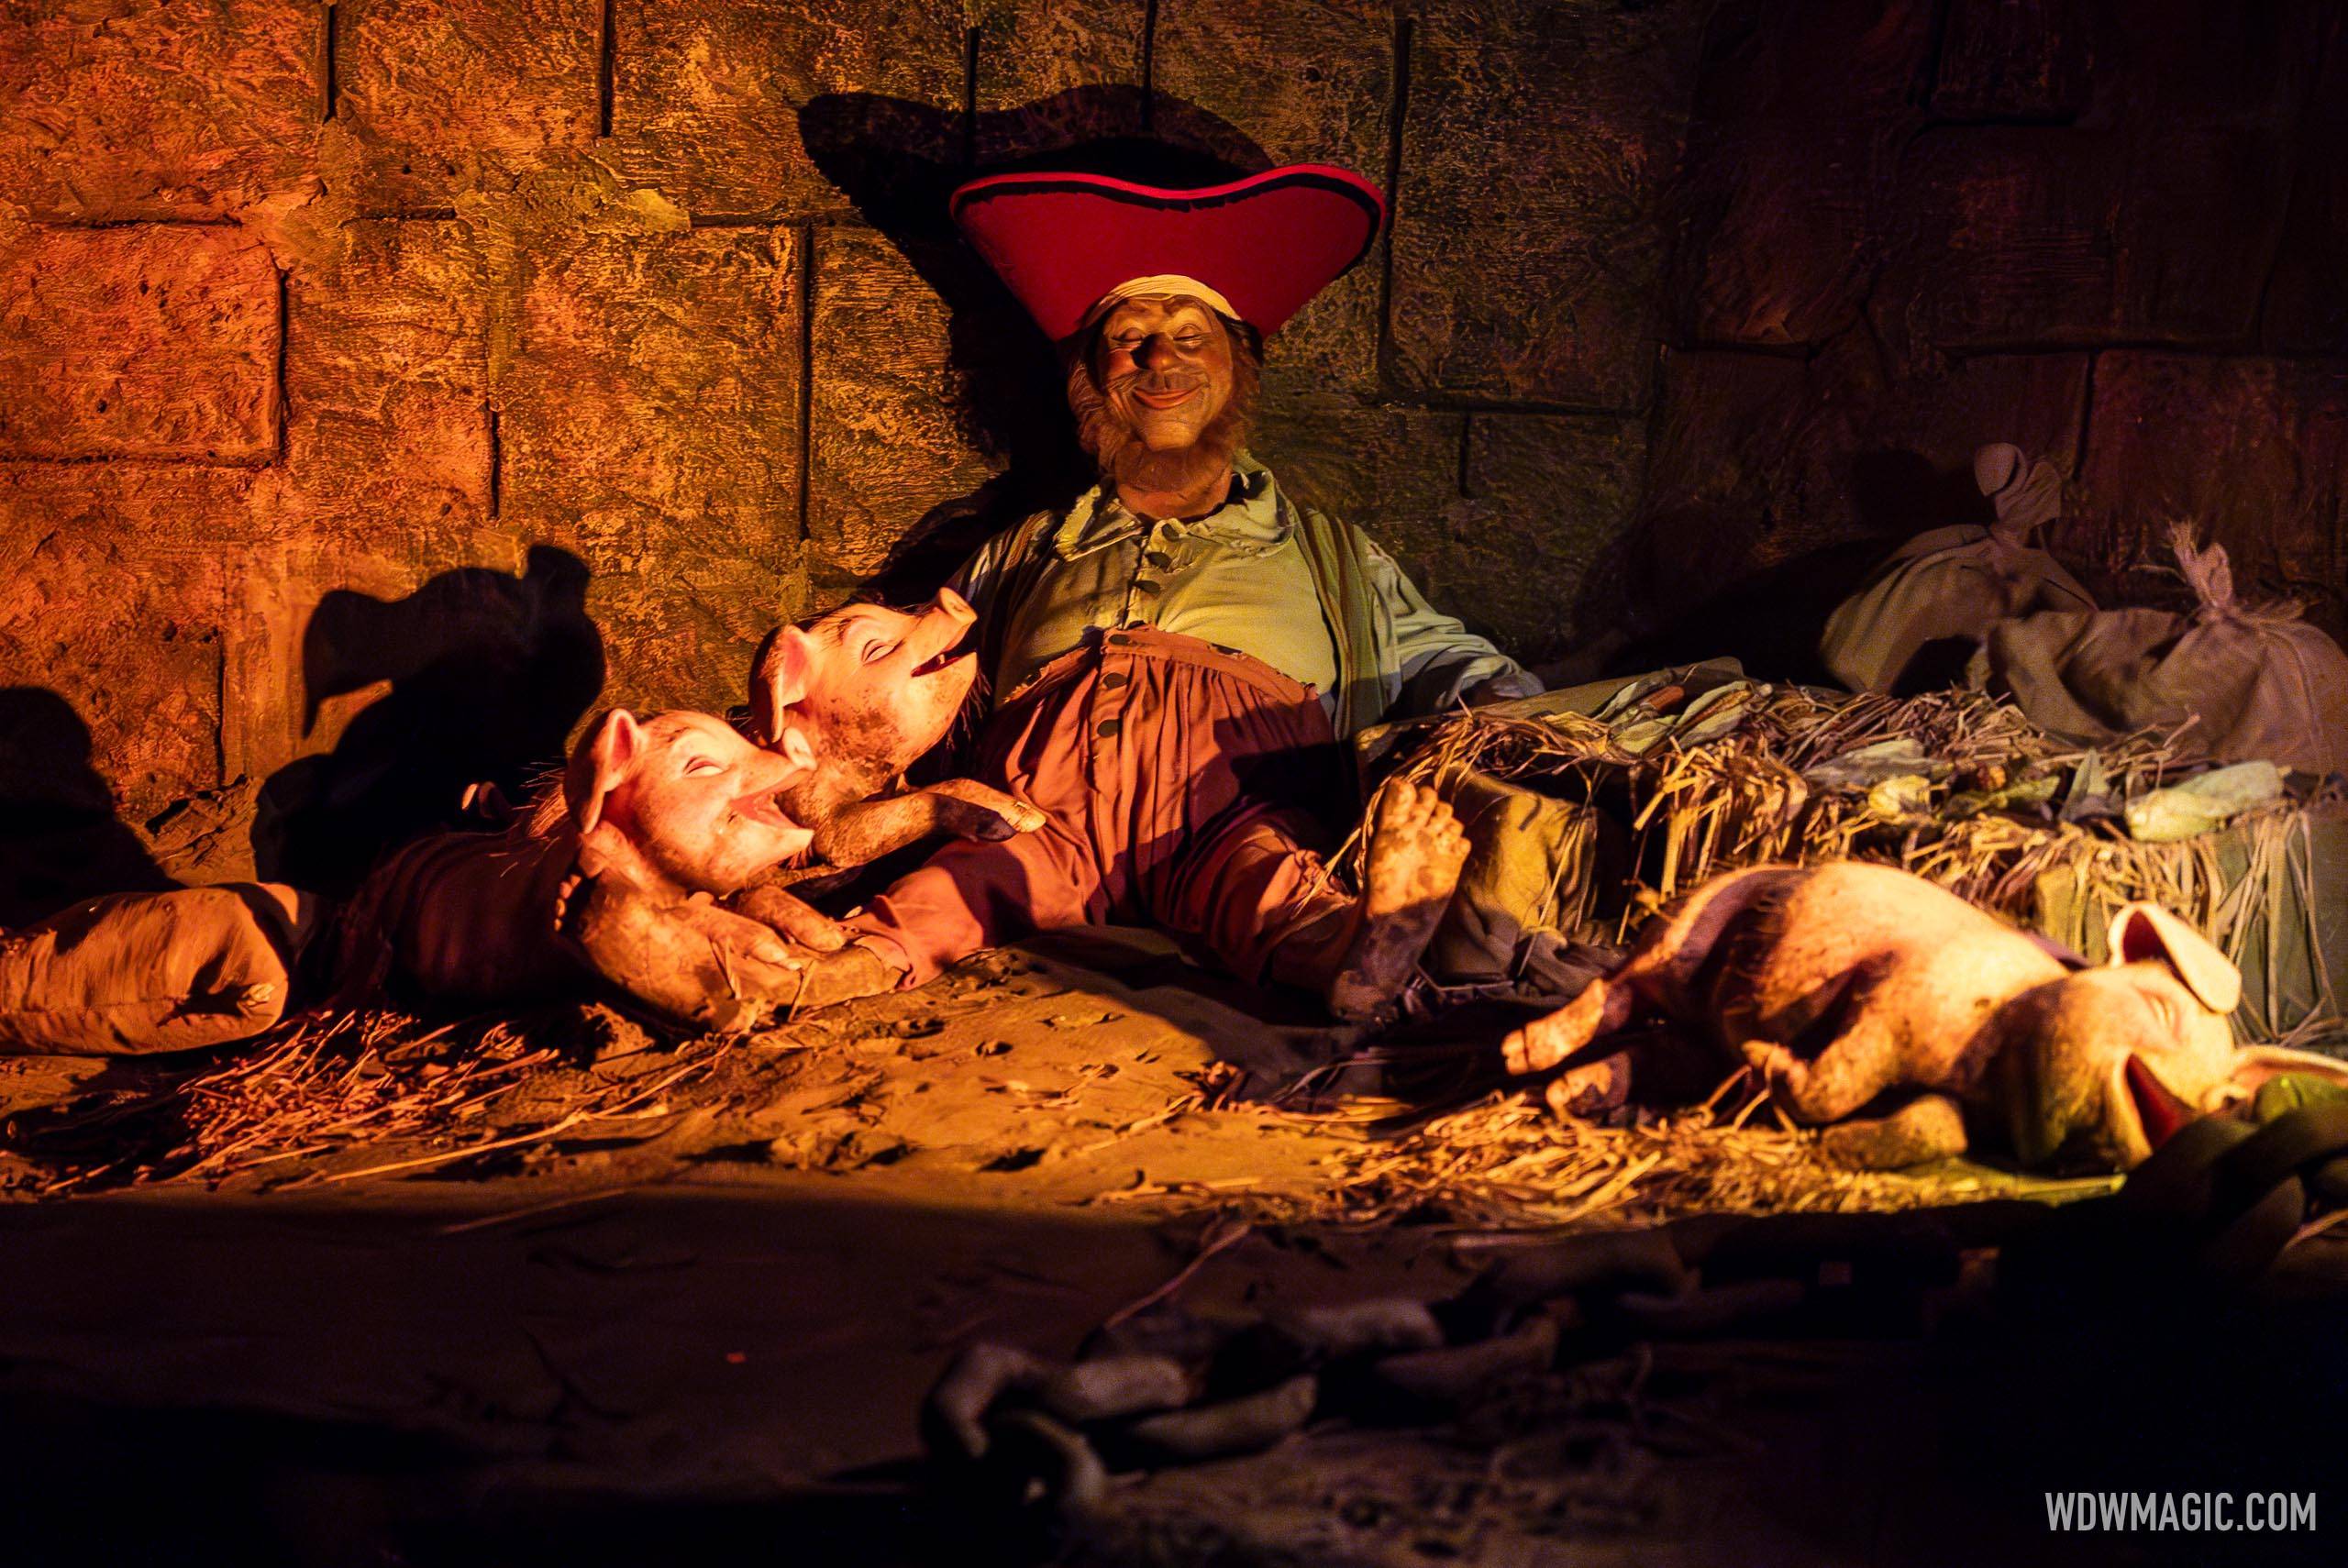 Pirates of the Caribbean reopening report